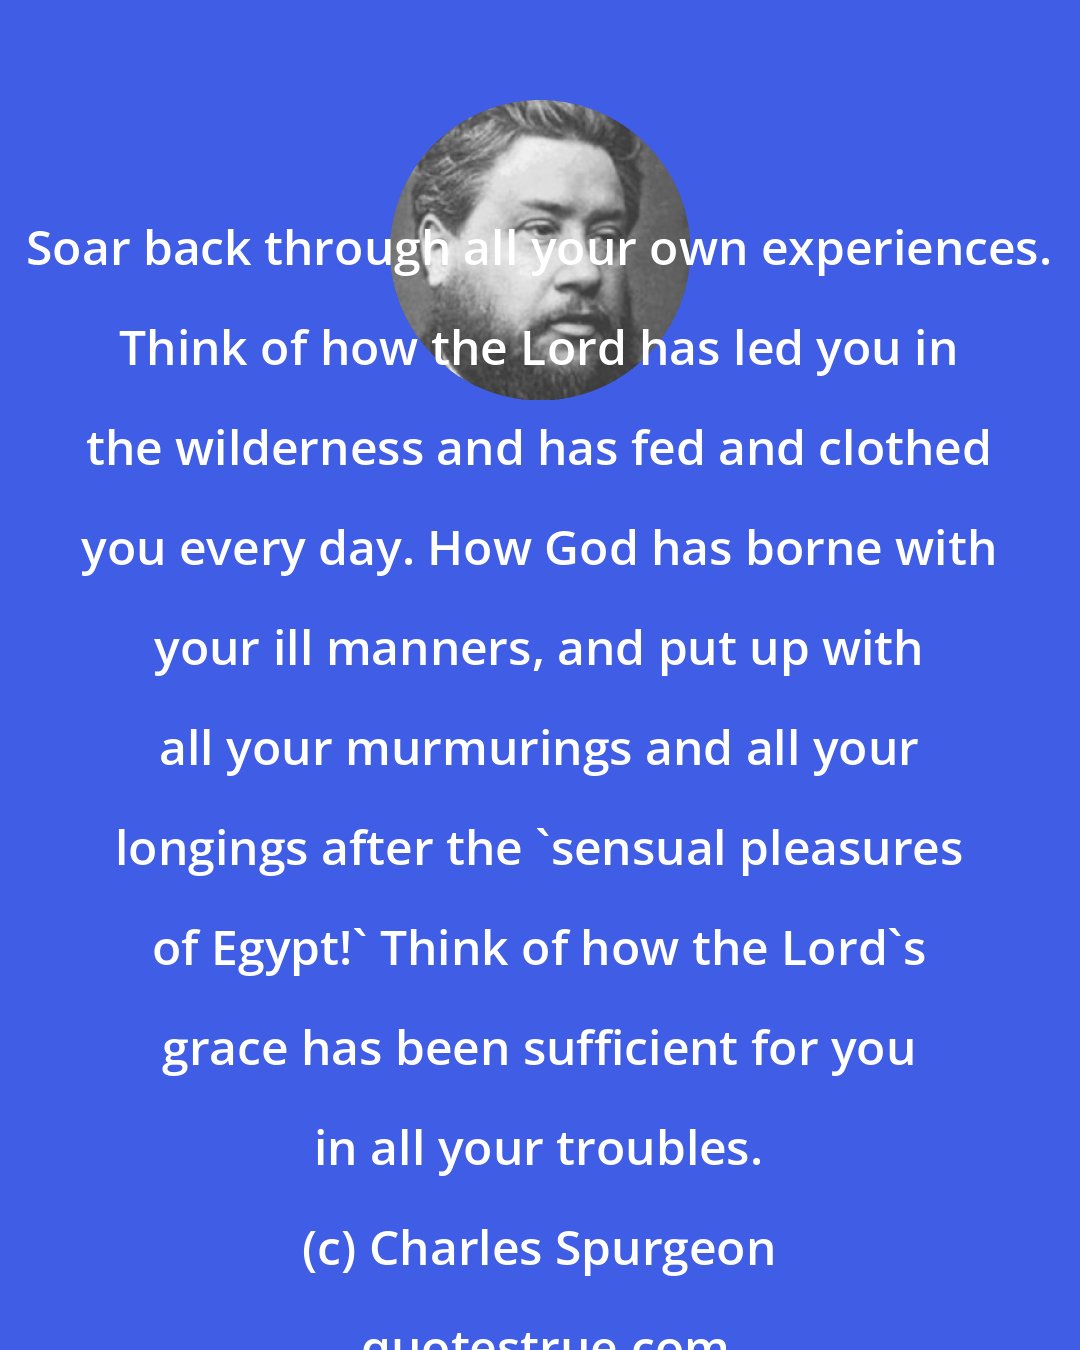 Charles Spurgeon: Soar back through all your own experiences. Think of how the Lord has led you in the wilderness and has fed and clothed you every day. How God has borne with your ill manners, and put up with all your murmurings and all your longings after the 'sensual pleasures of Egypt!' Think of how the Lord's grace has been sufficient for you in all your troubles.